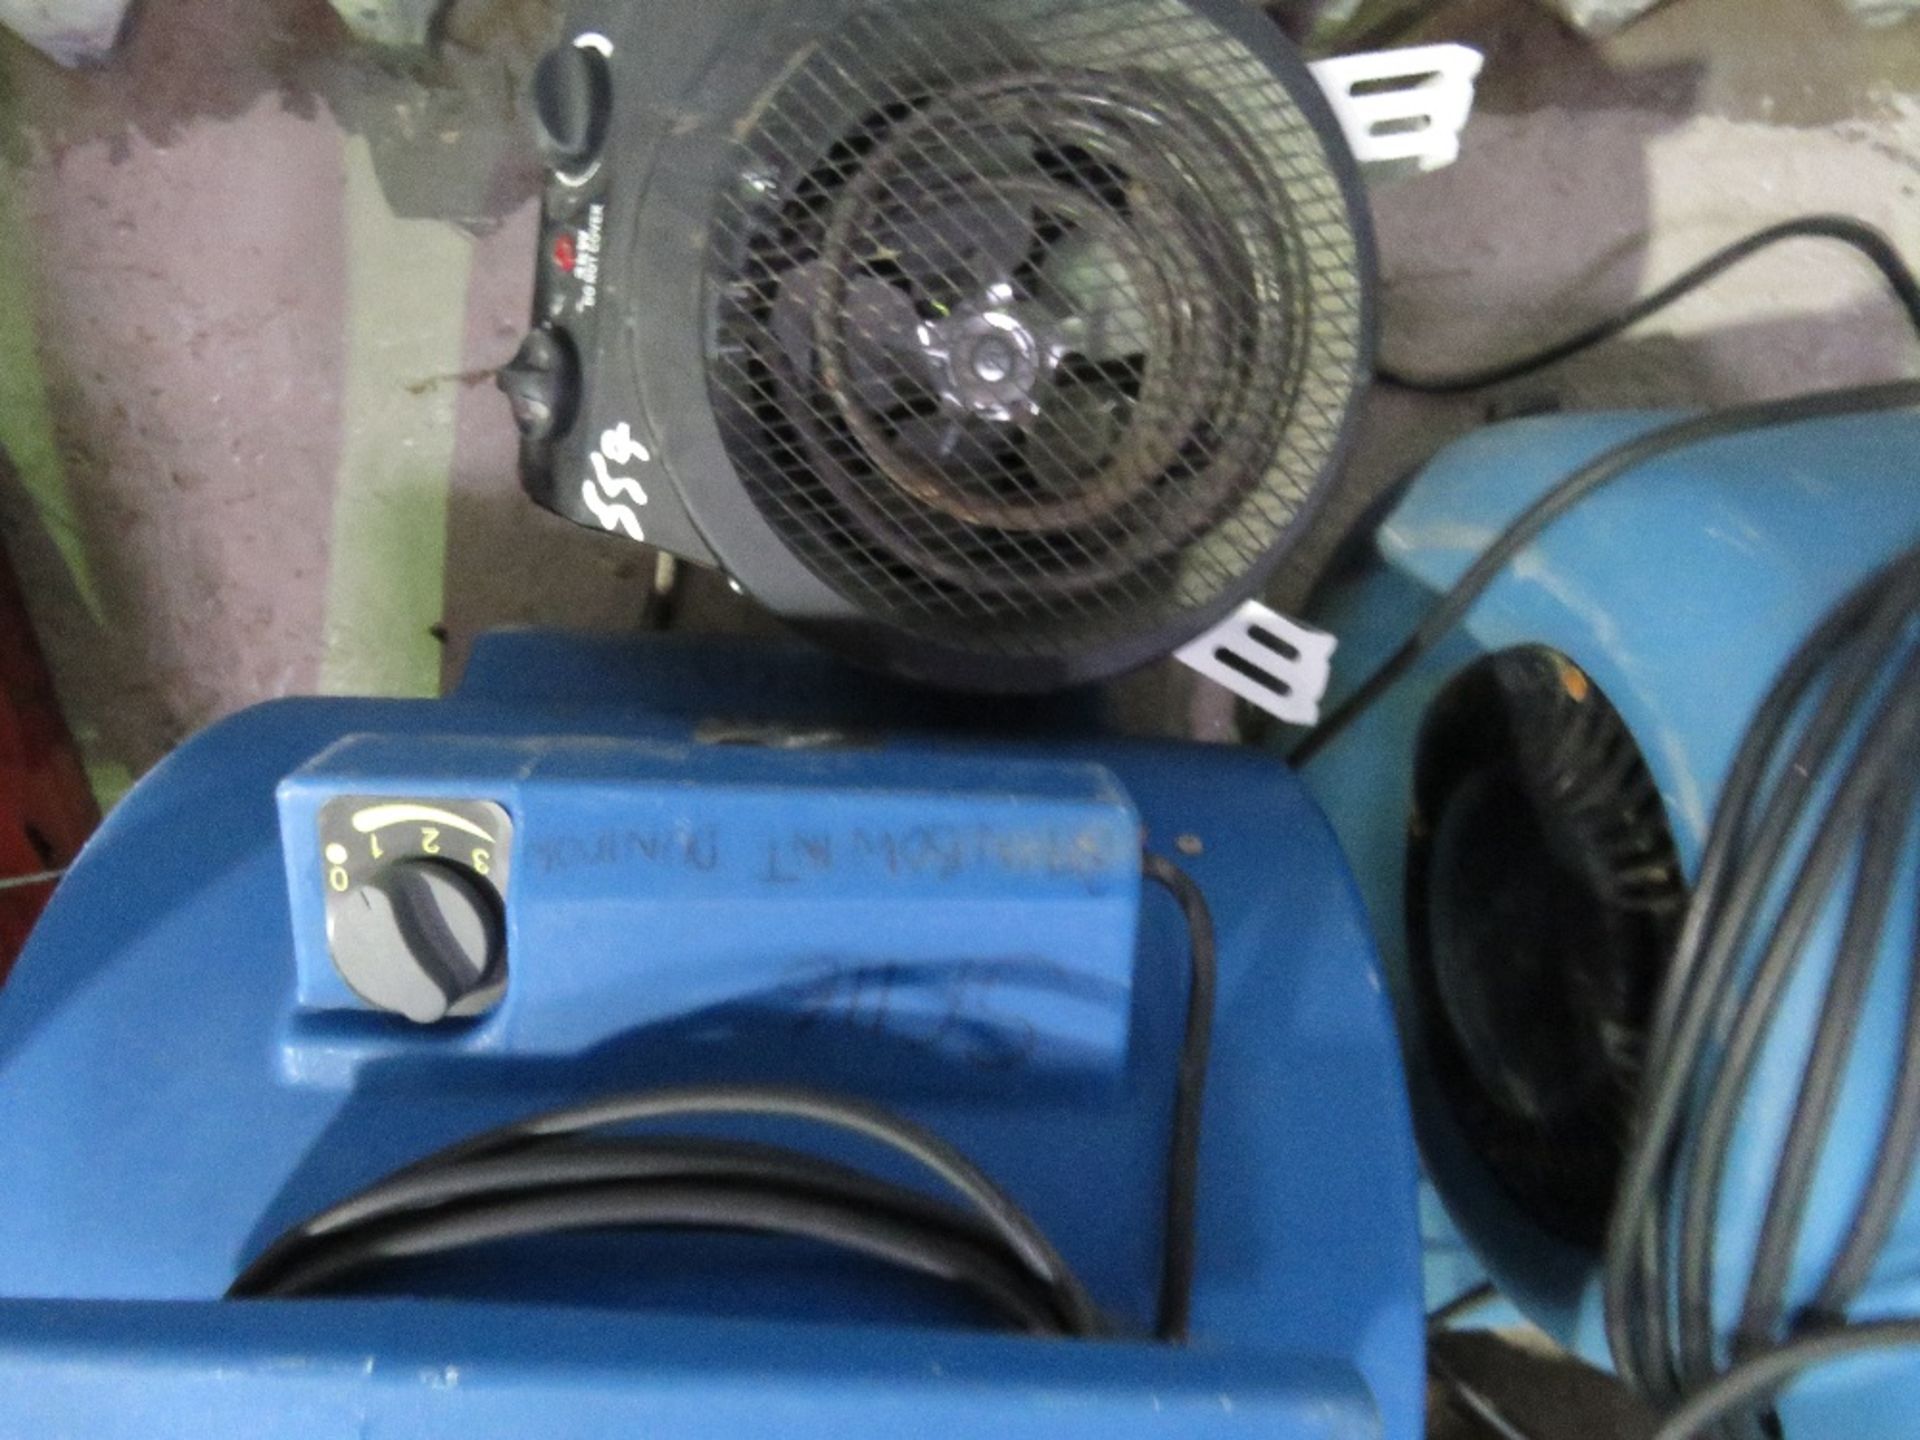 2 X SNAIL BLOWER CARPET DRYING FANS, 240 VOLT PLUS A 3KW FAN HEATER. THIS LOT IS SOLD UNDER THE A - Image 3 of 3